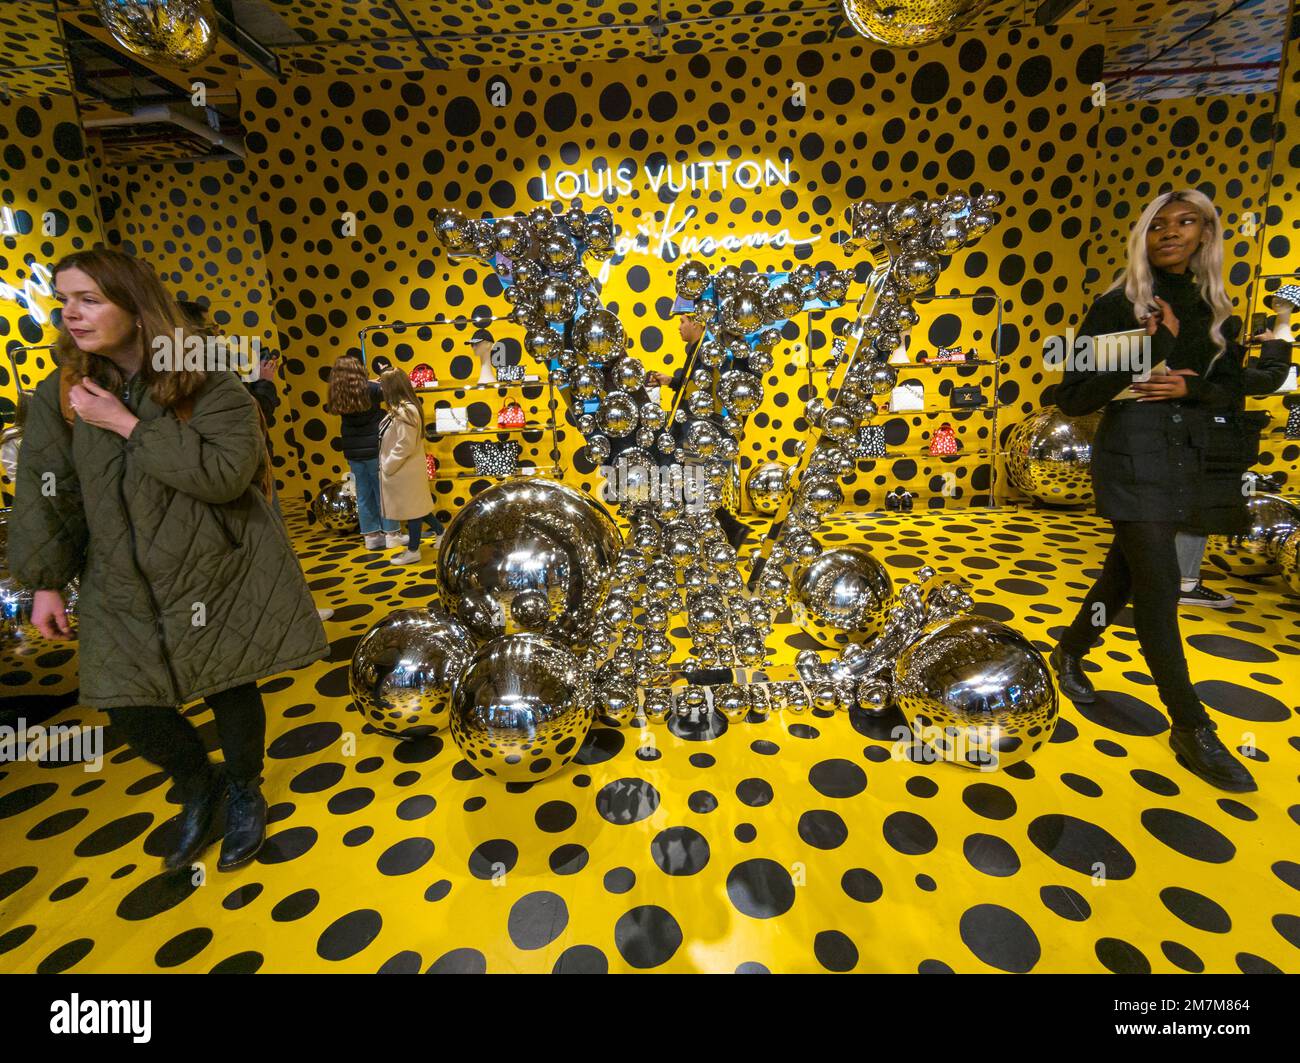 Crowds flock to the Louis Vuitton store in the Meatpacking